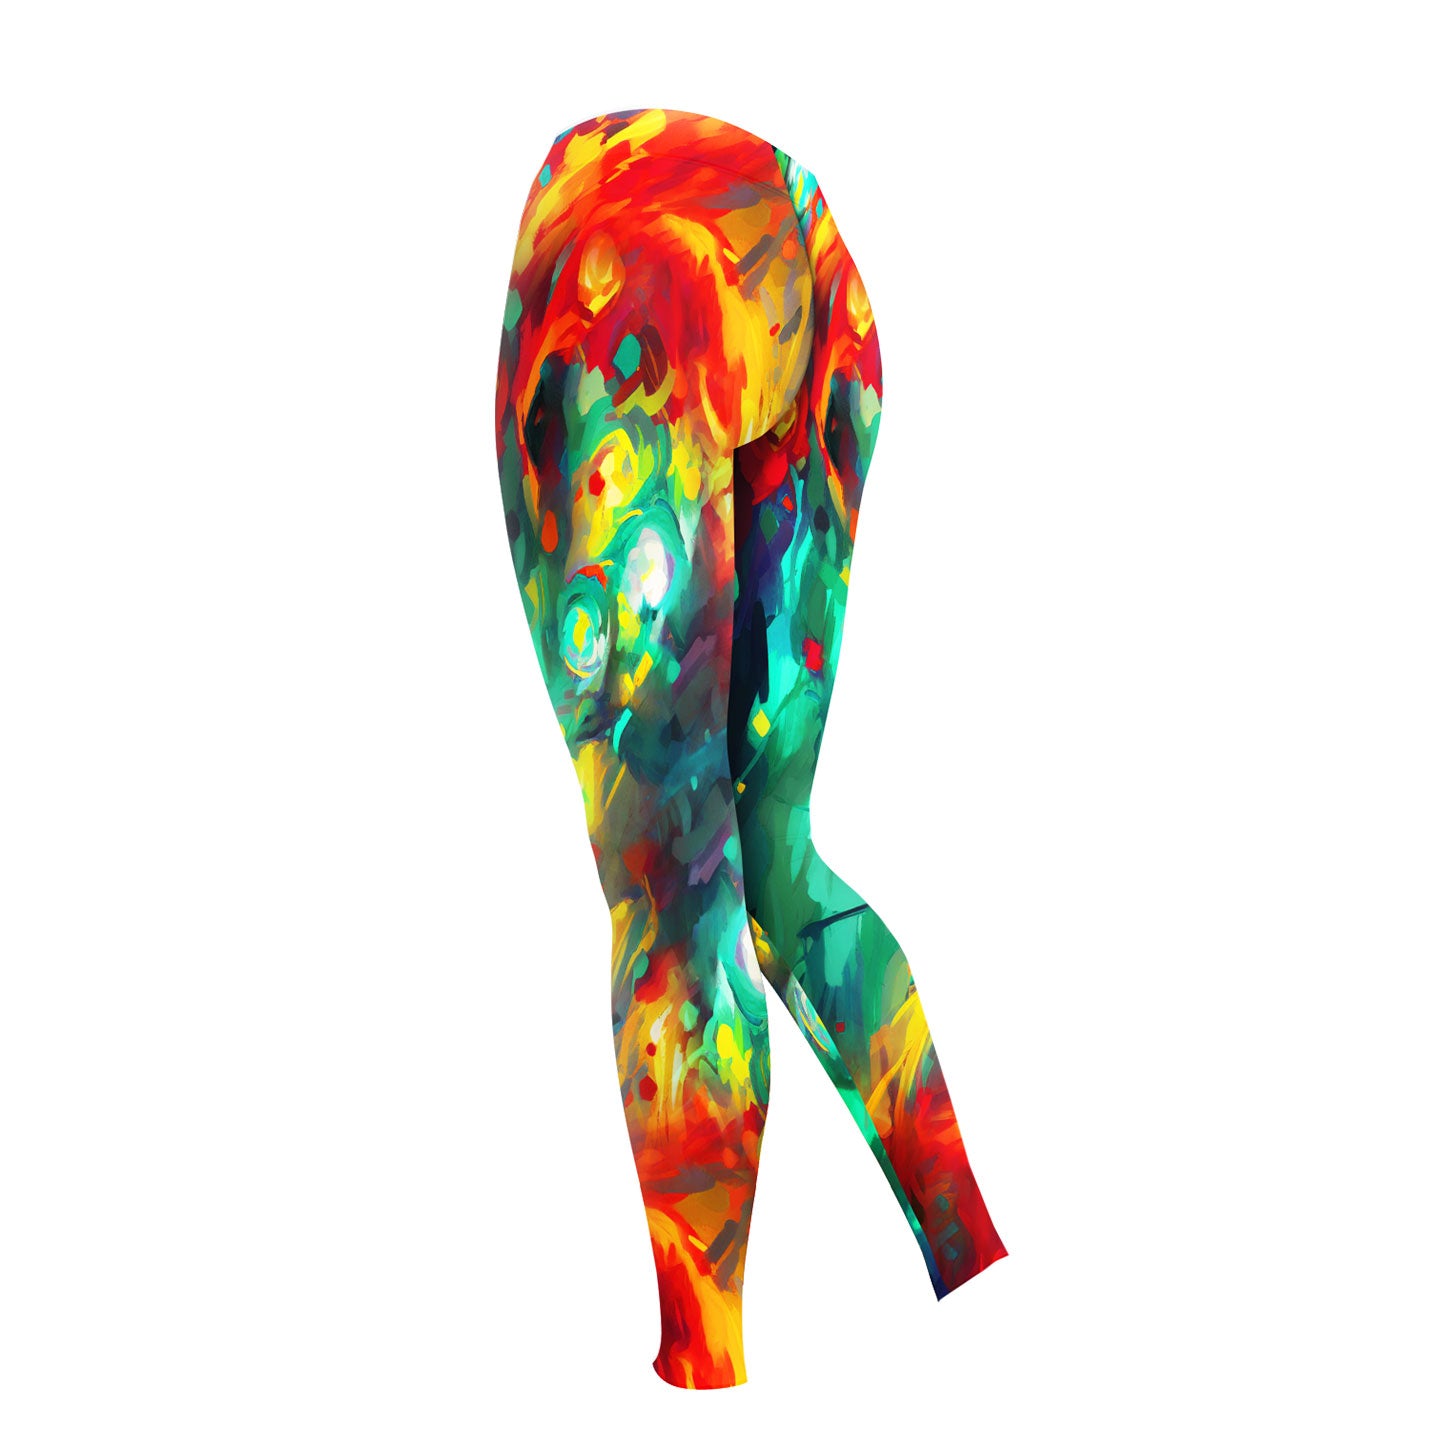 Colorful Paint Nightmare Art Combo Hoodie and Leggings - Dark and edgy matching set with skull designs for a unique and stylish look.